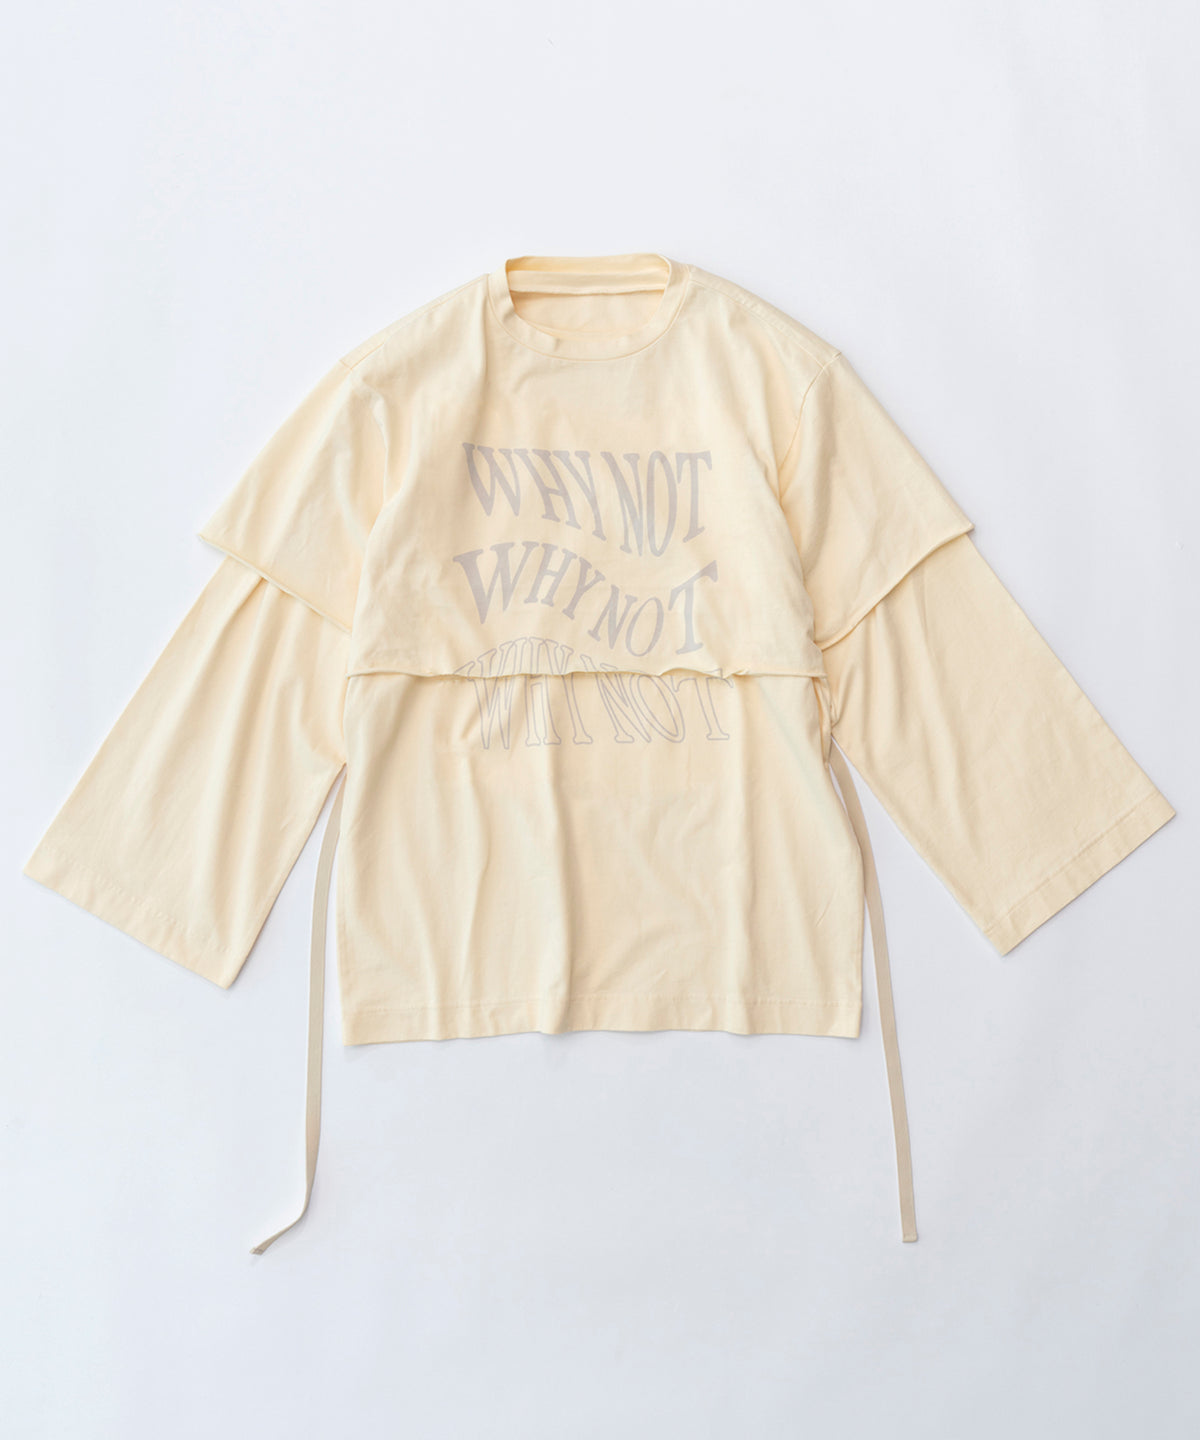 【SALE】WHY NOT Layered Long T-shirt